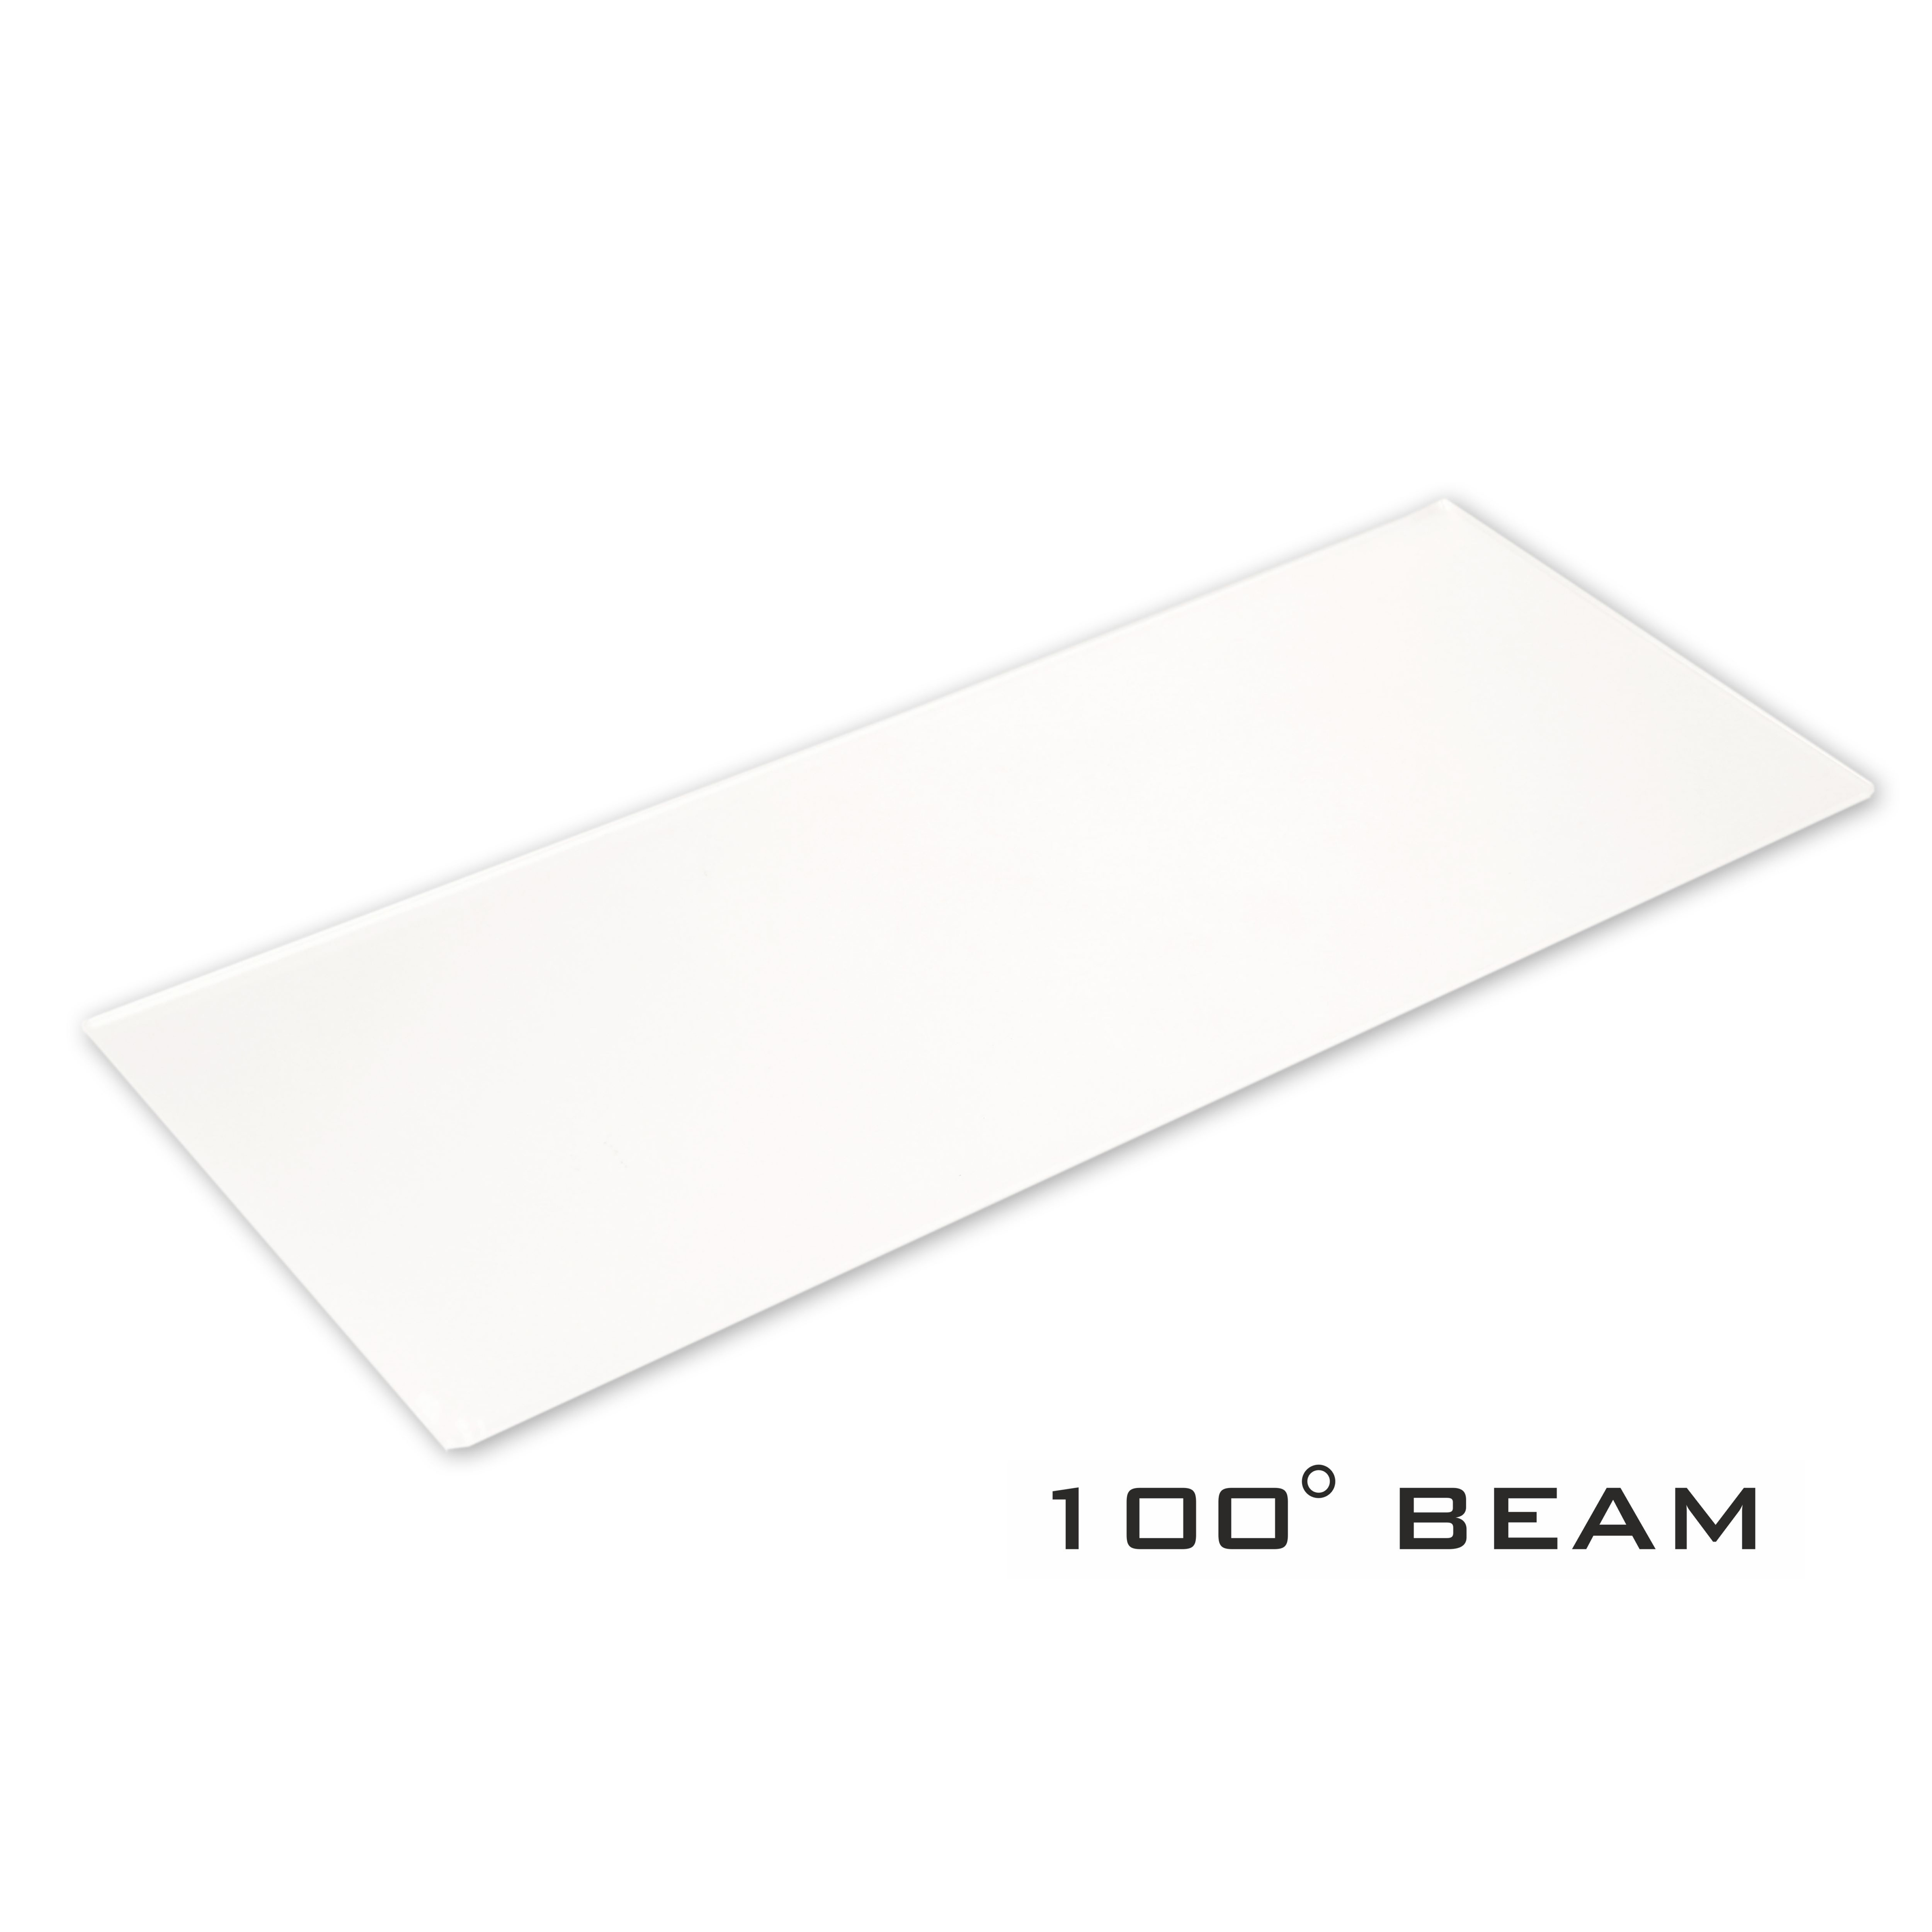 Beam shaper for BT-CHROMA 800: changes the standard beam to 100- vertical x 100- horizontal